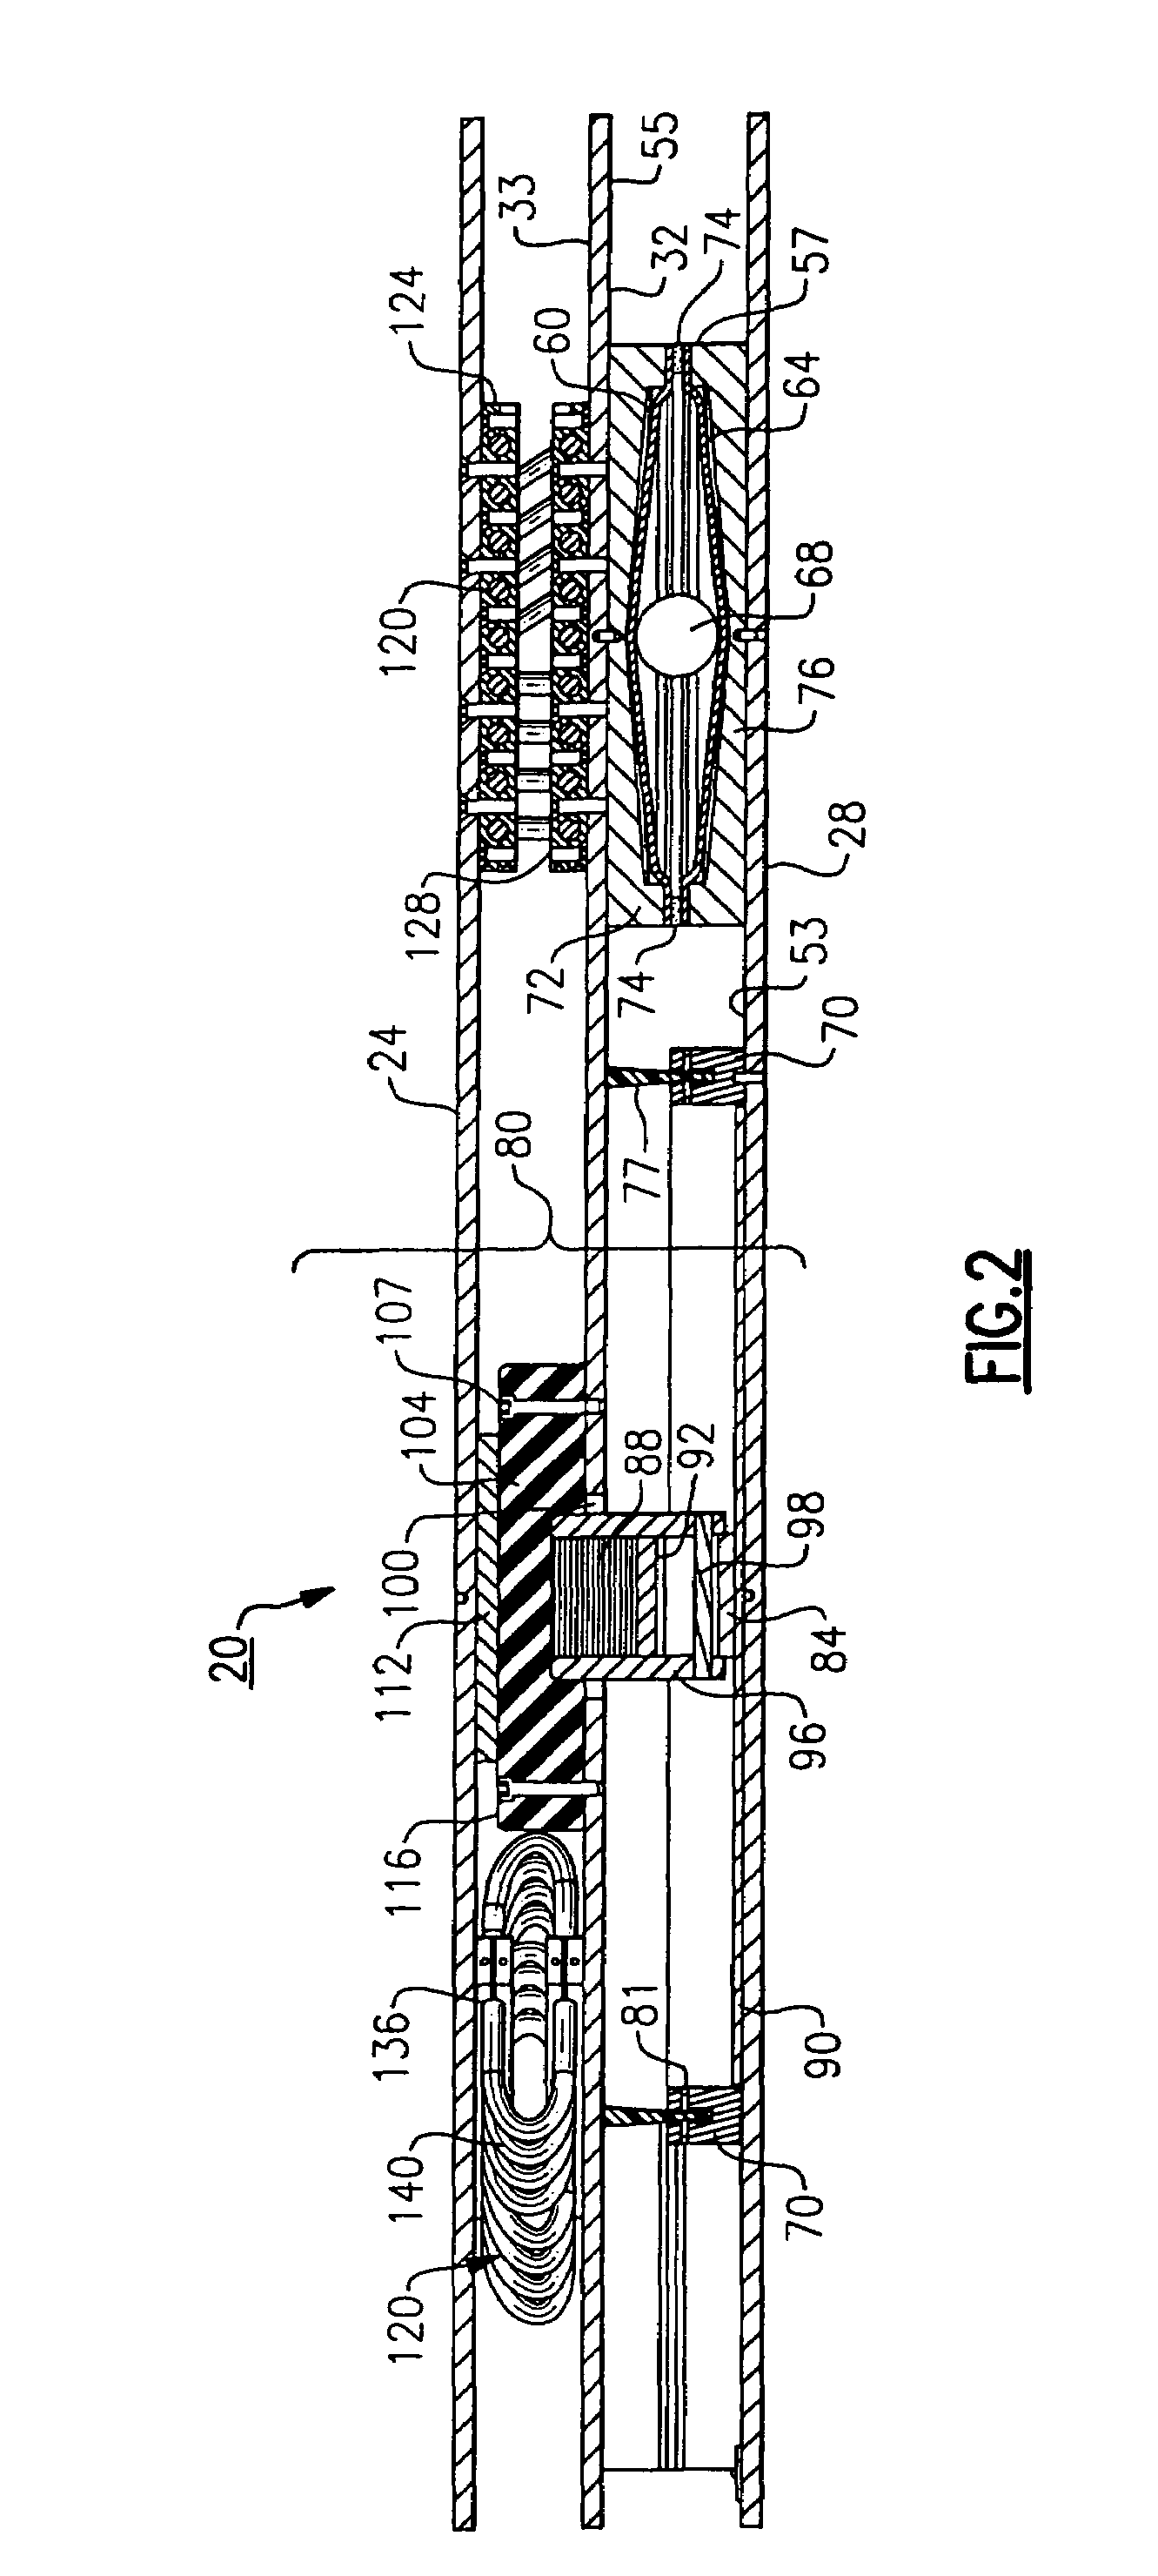 Multi-axial base isolation system